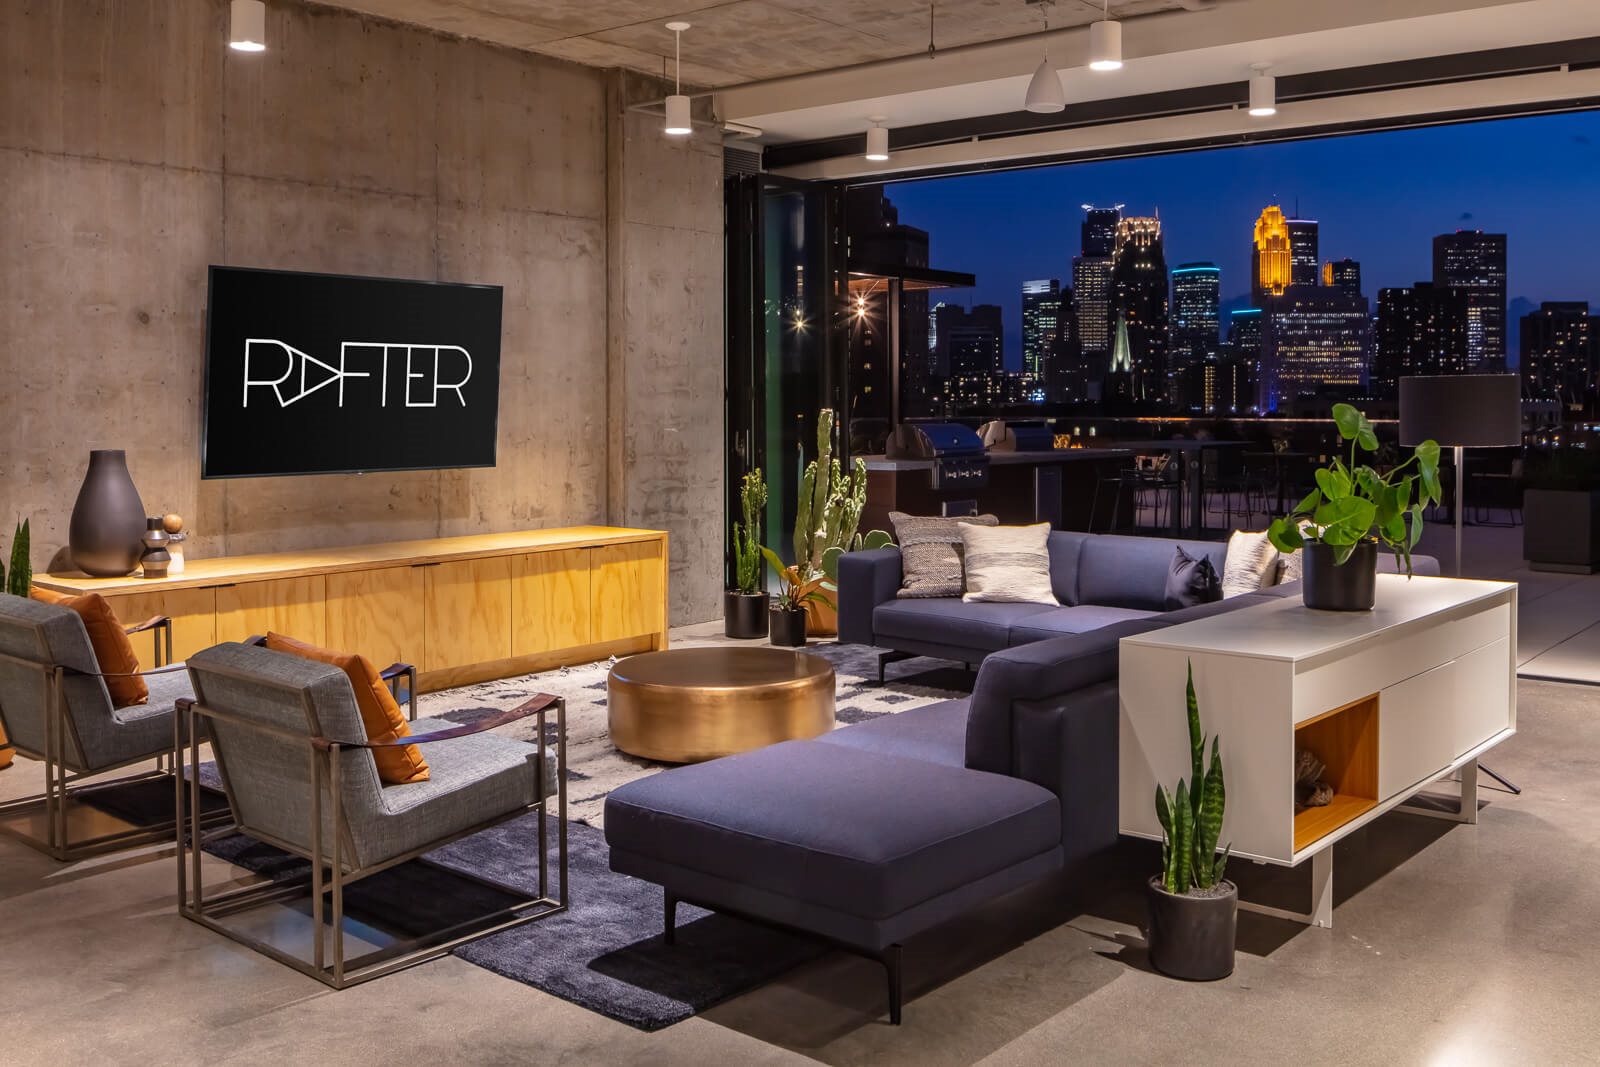 Clubroom seating and minneapolis skyline at night time